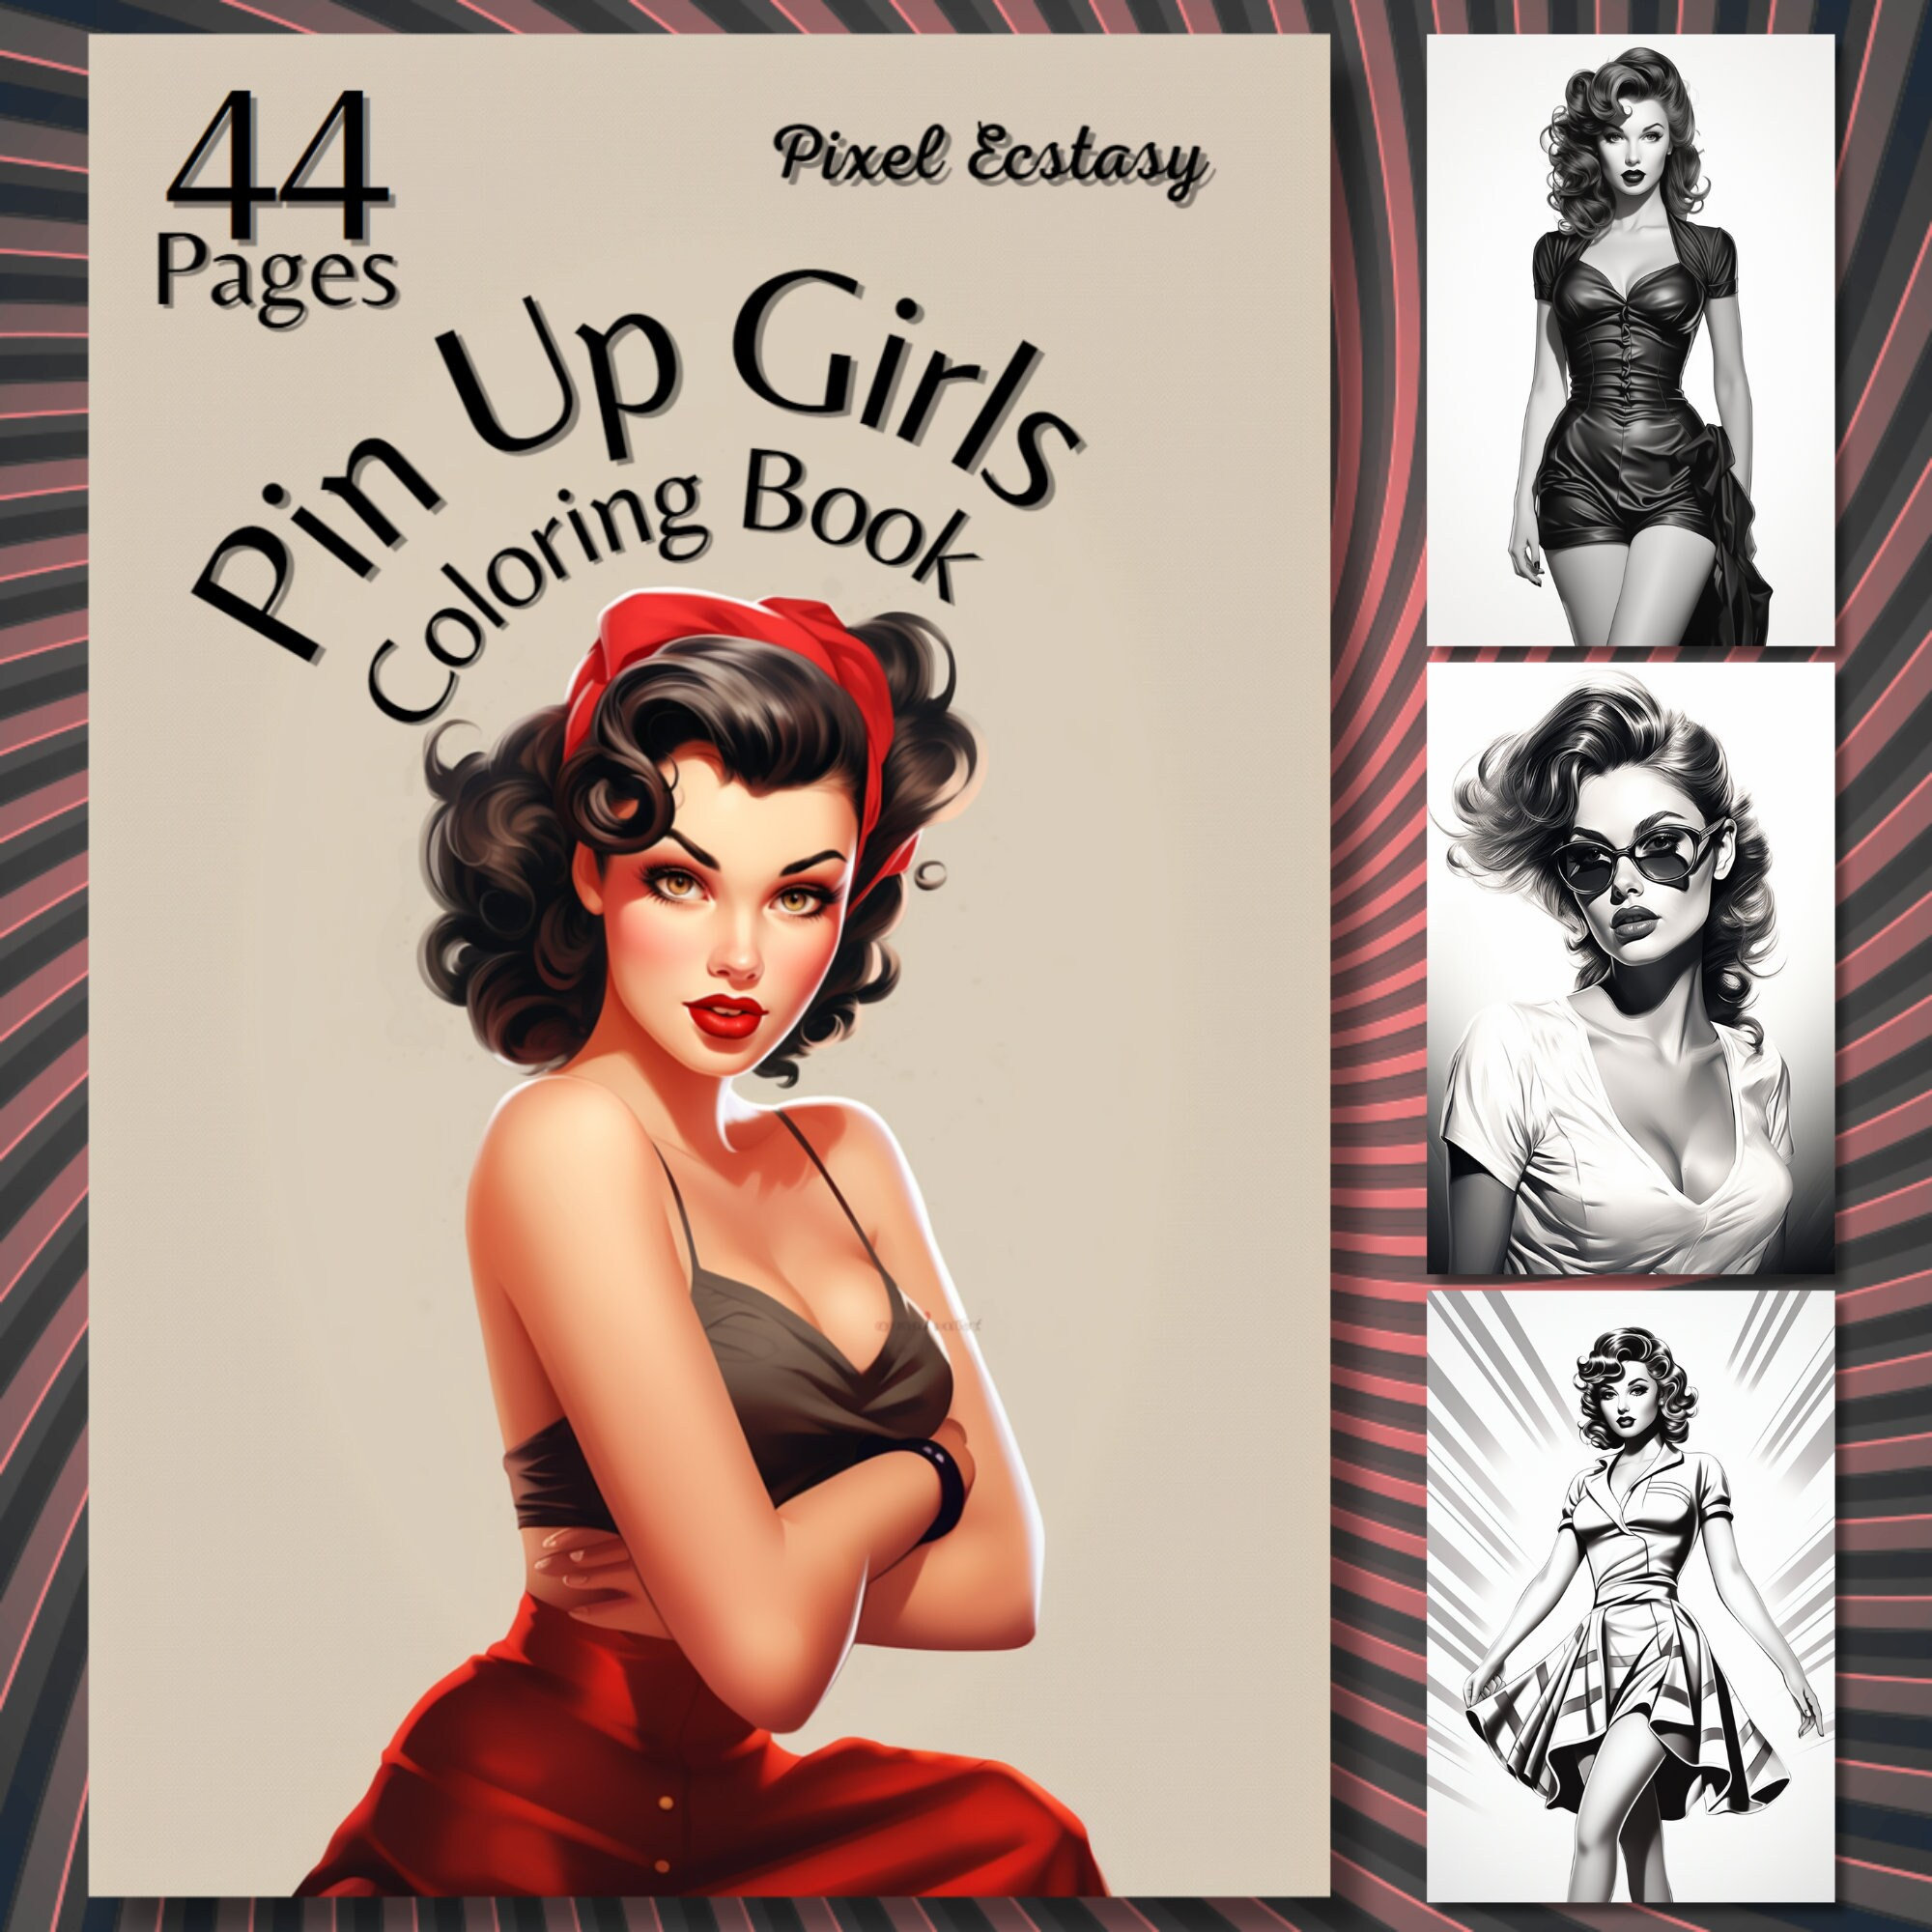 Pin Up Girls, Pinup Vintage Cliparts Graphic by Painting Pixel Studio ·  Creative Fabrica